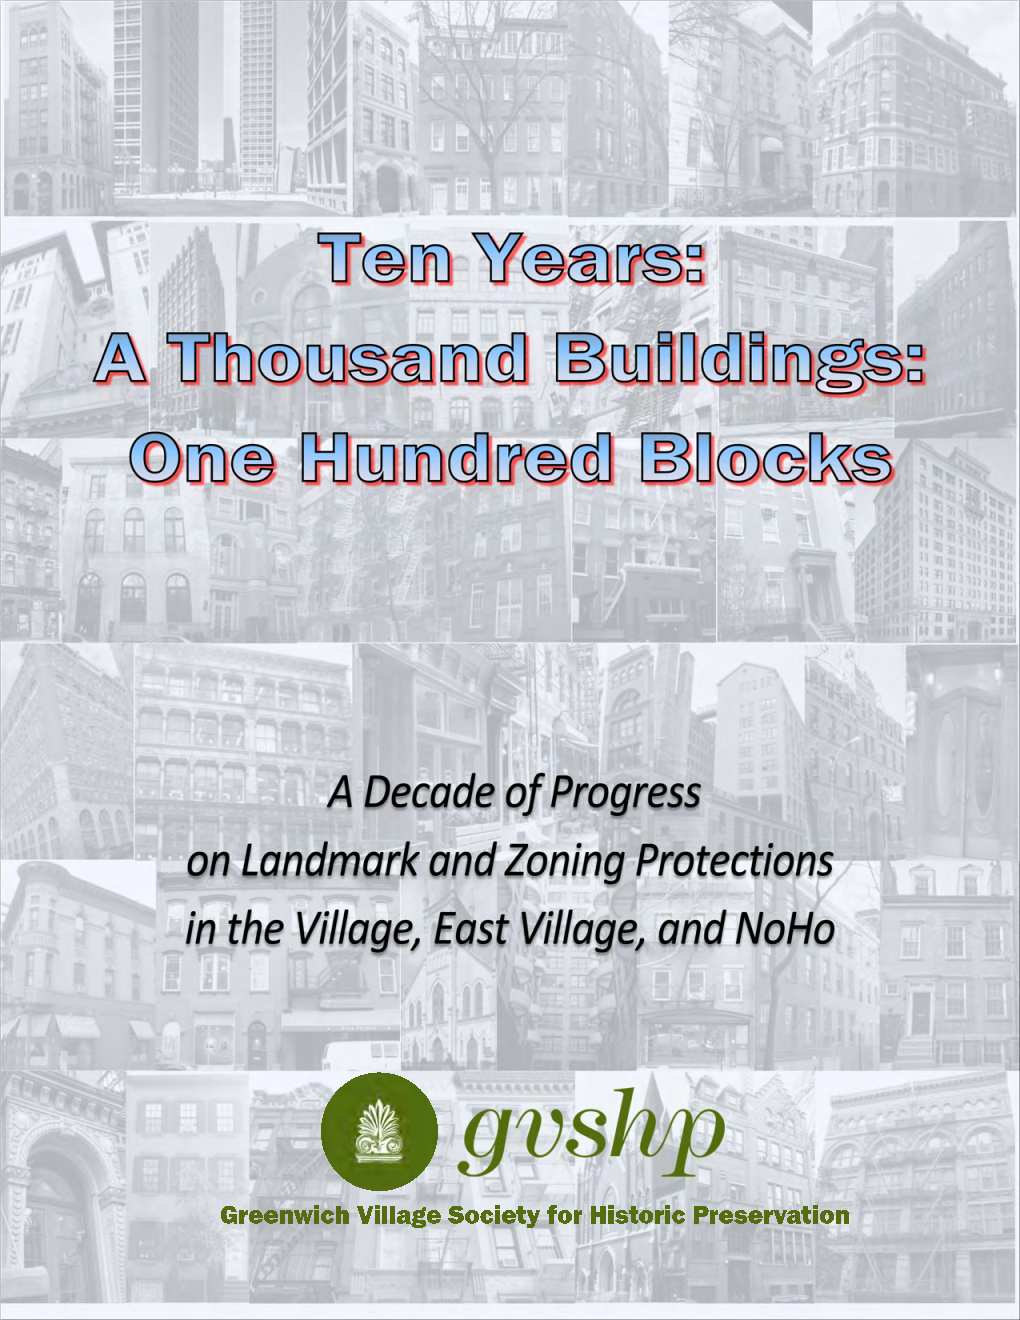 A Thousand Buildings Landmarked: One Hundred Blocks Rezoned … 1